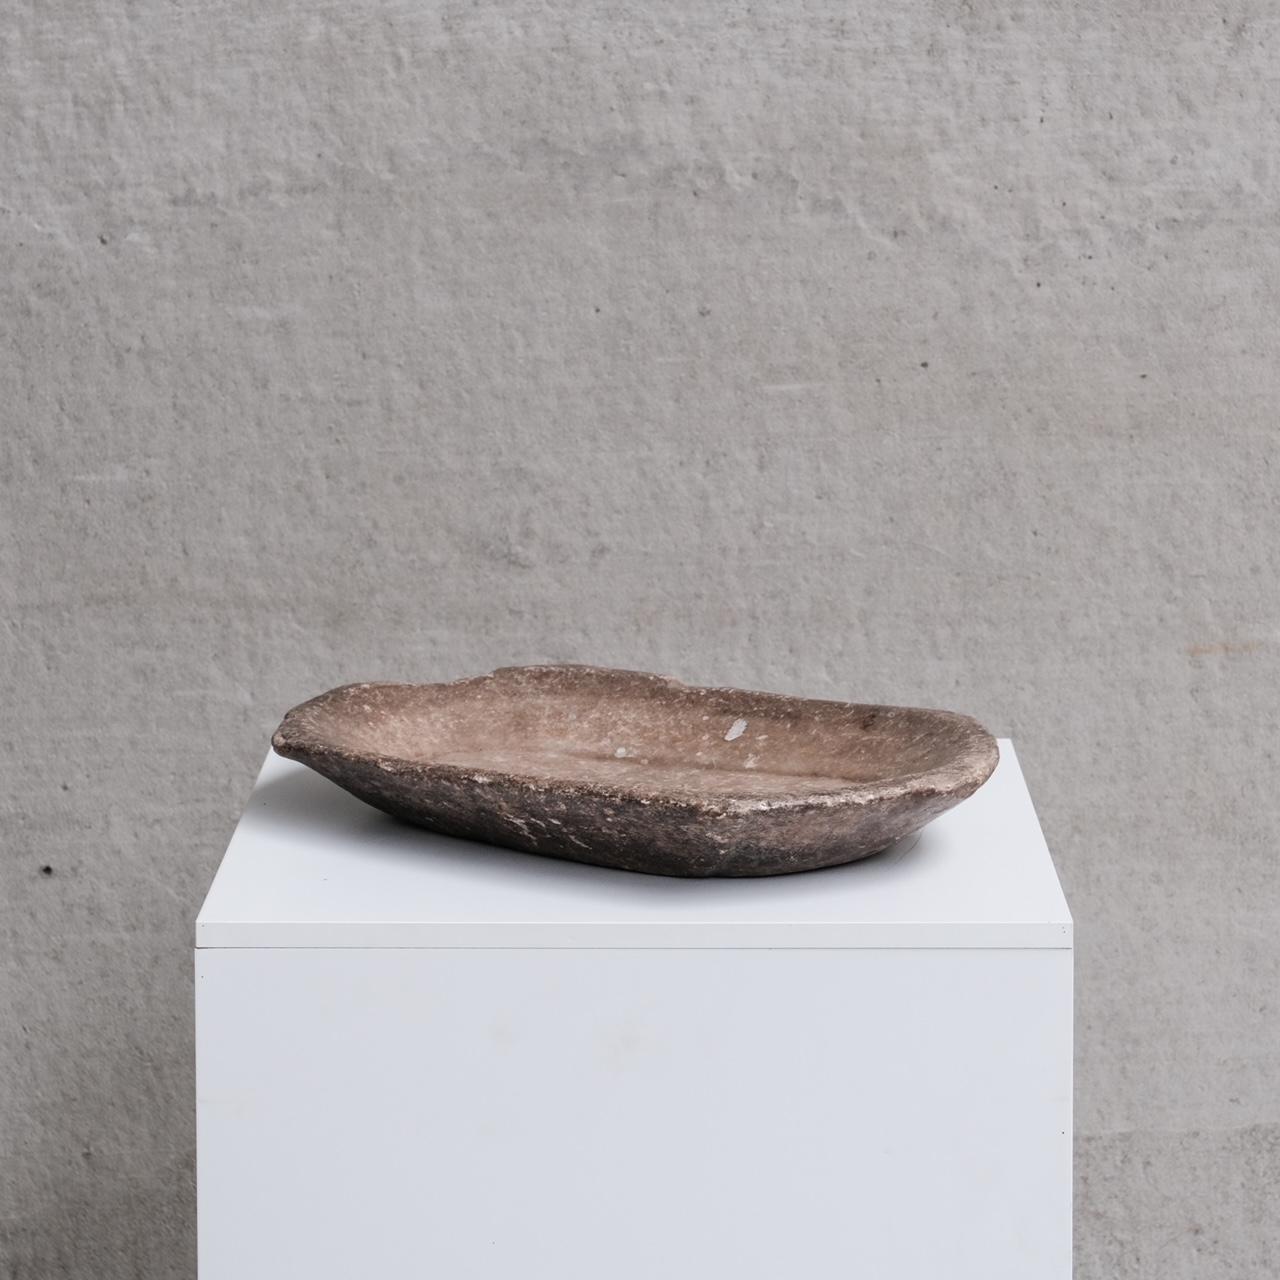 A simple wabi-sabi esque platter.

Nepal, c1960s.

A stone or marble of some form.

Very tactile, and functional.

Internal ref: 30/11/2023/020.

Good vintage condition, some scuffs and wear commensurate with age.

Location: Belgium